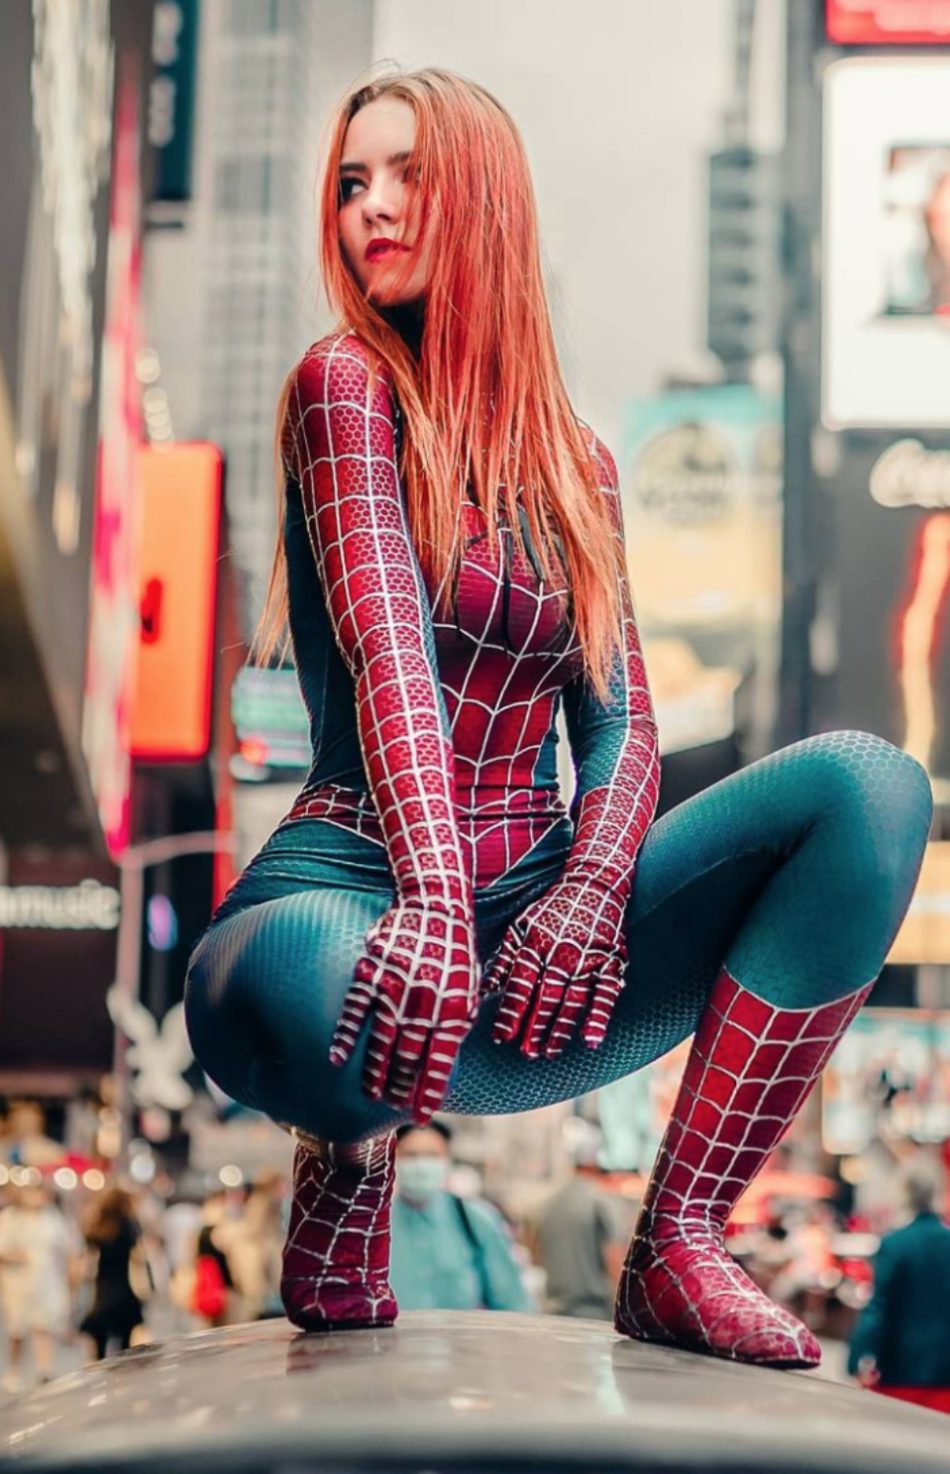 Sexy Red Hot Cosplay Girls Spiderman Women Best Photo Compilation 2021 (89 HQ Photos) 501